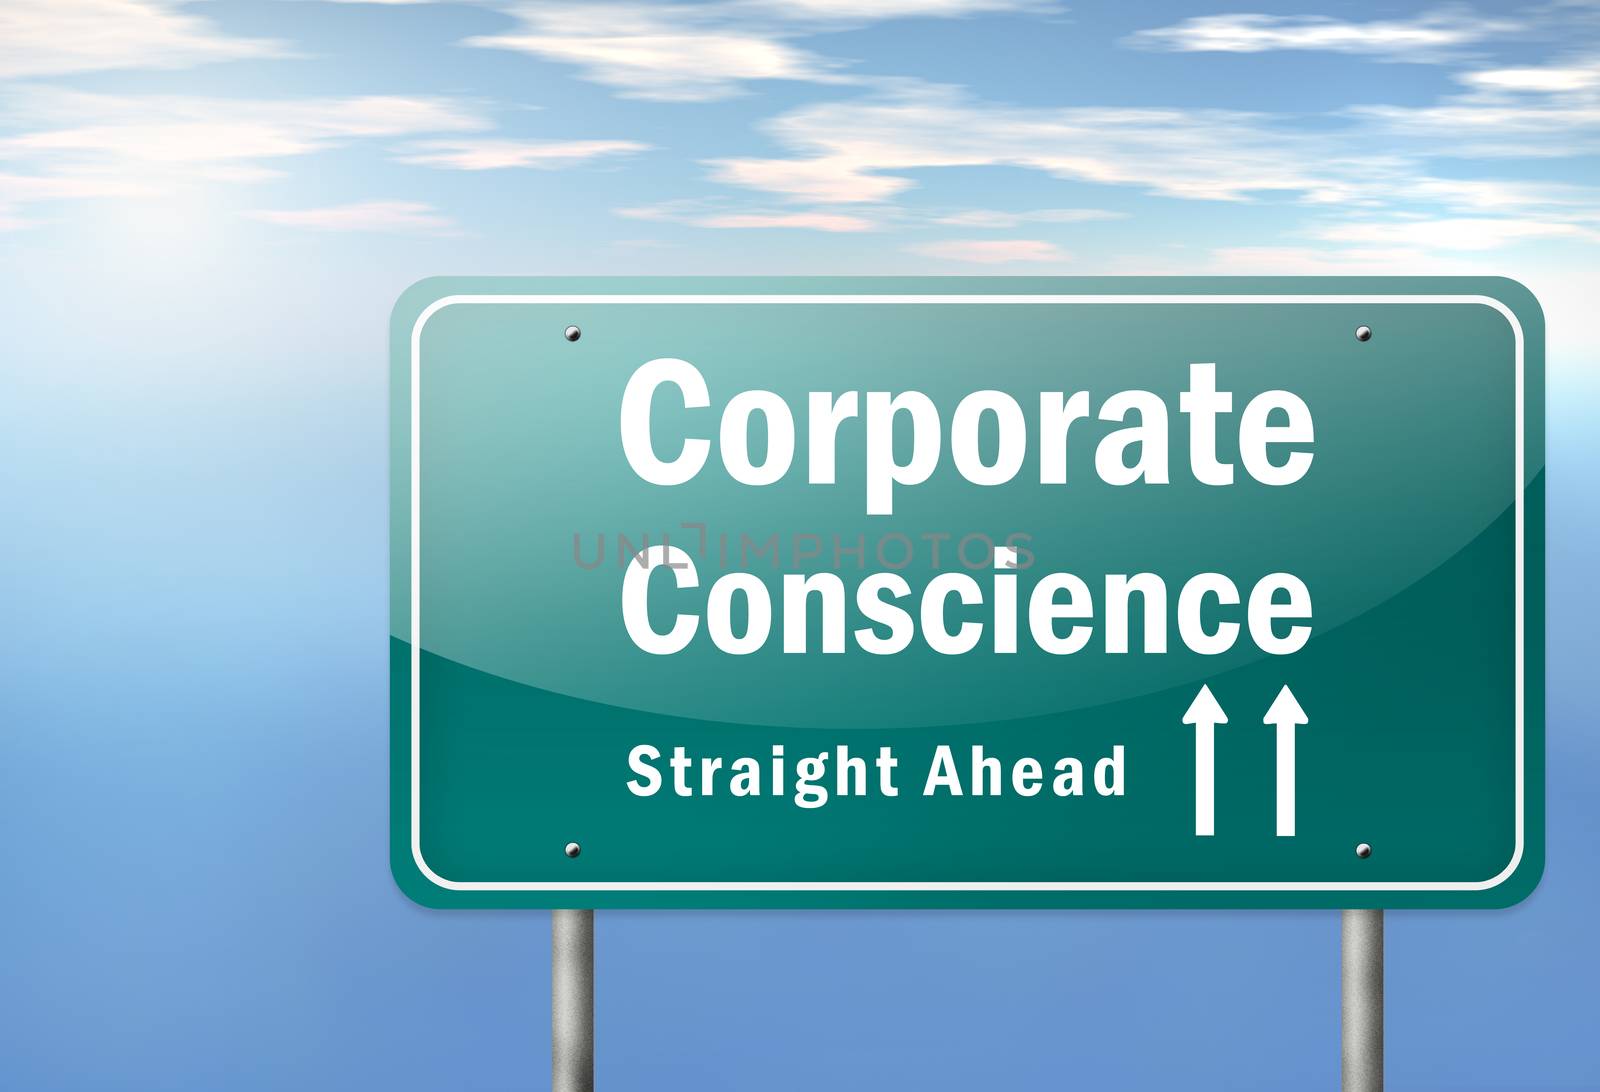 Highway Signpost with Corporate Conscience wording